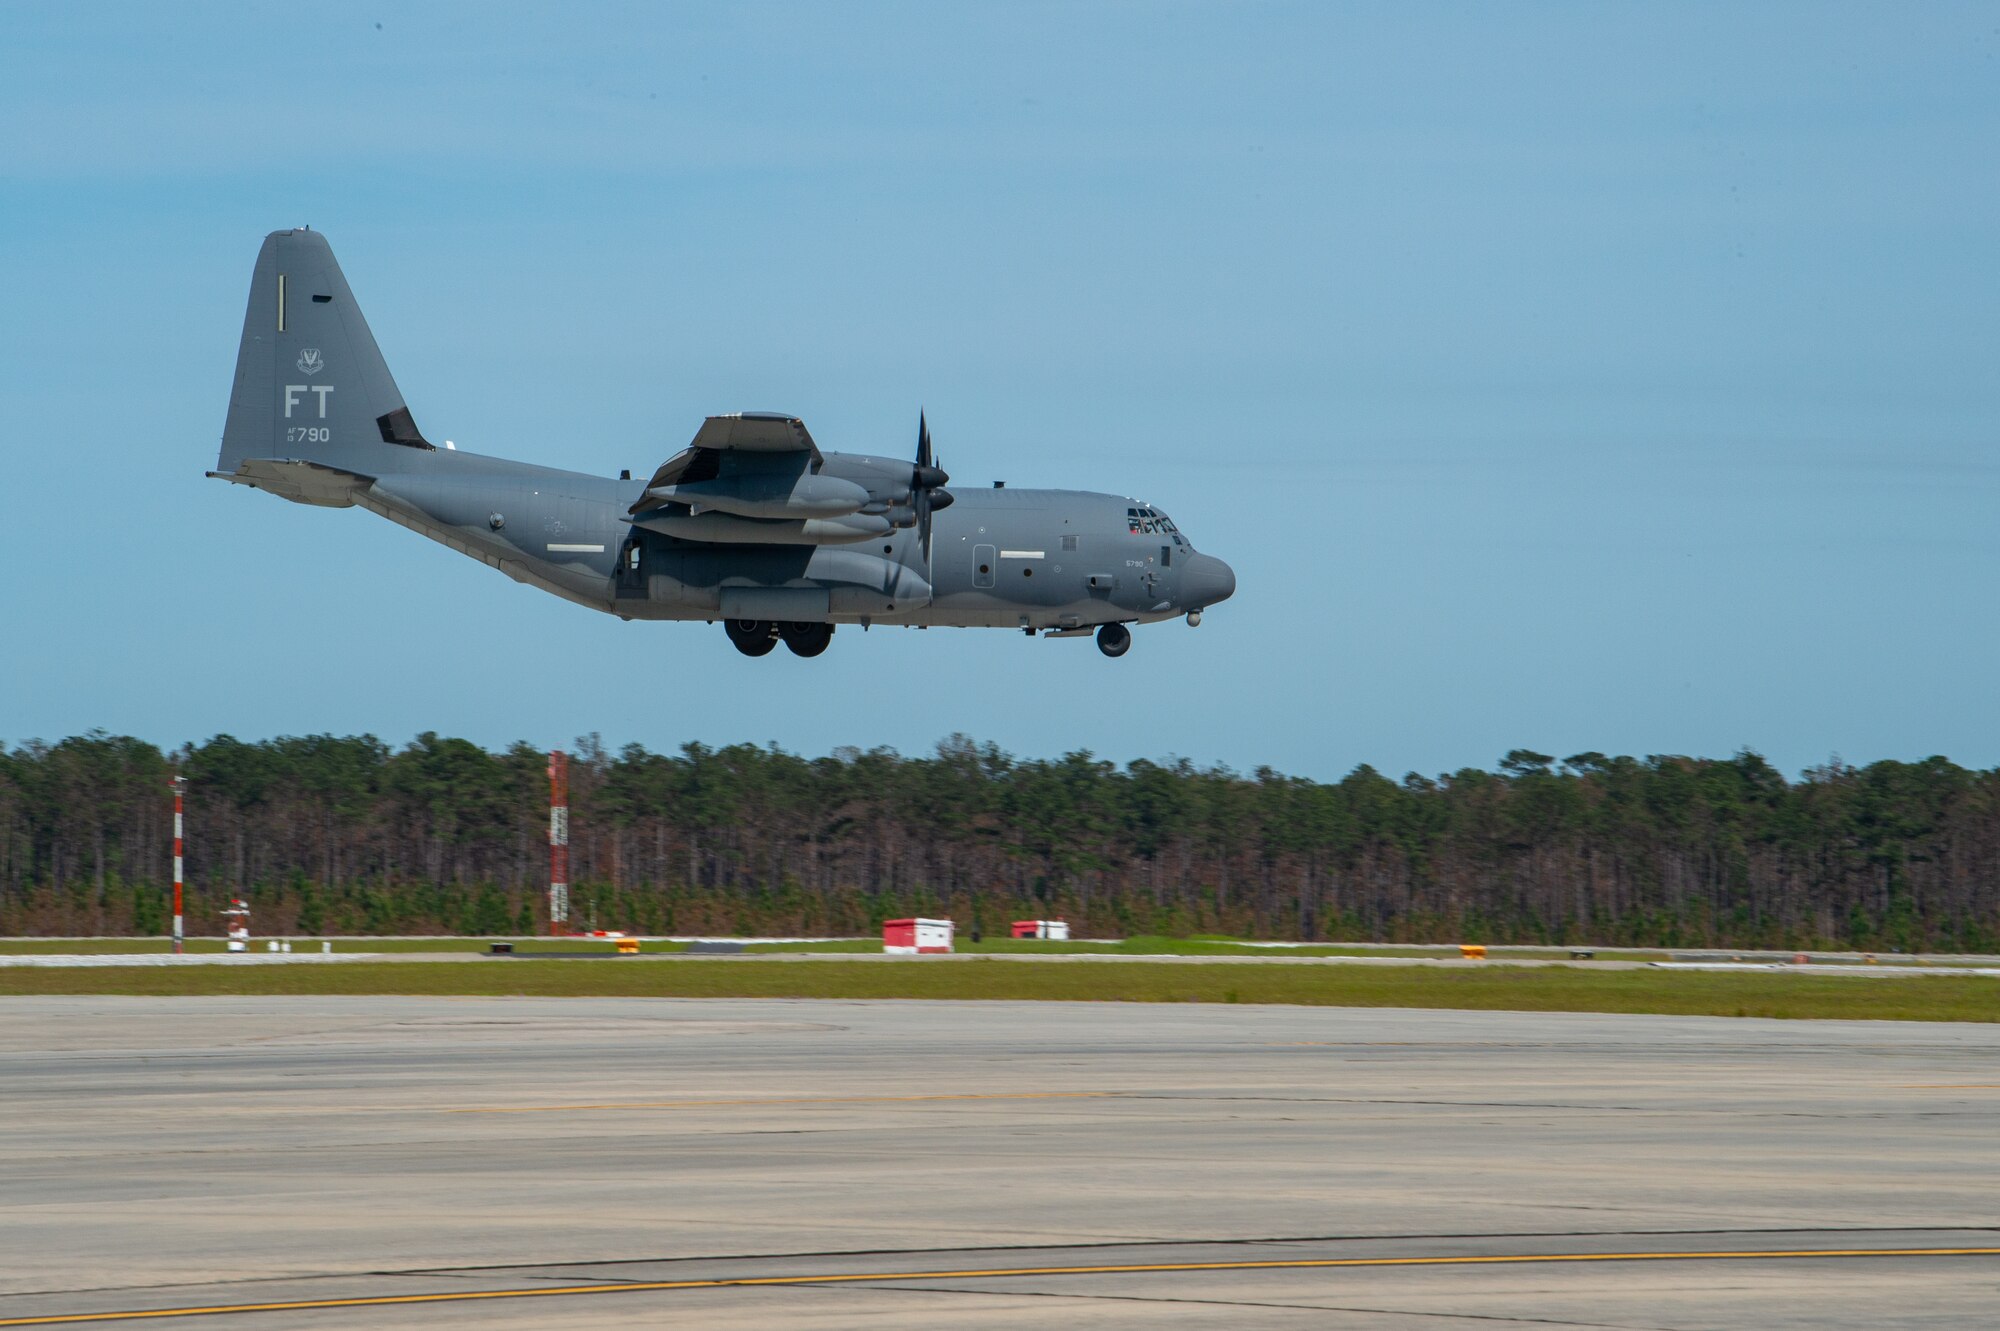 A U.S. Air Force HC-130J Combat King II assigned to the 71st Rescue Squadron prepares to land during Exercise Ready Tiger 24-1 at Moody Air Force Base, Georgia, April 8, 2024. The 71st Rescue Squadron assisted during the exercise as the main mode of transportation for equipment and personnel to various exercise locations throughout Georgia and Florida. During Ready Tiger 24-1, the 23rd Wing will be evaluated on the integration of Air Force Force Generation principles such as Agile Combat Employment, integrated combat turns, forward aerial refueling points, multi-capable Airmen, and combat search and rescue capabilities.
(U.S. Air Force photo by Airman 1st Class Iain Stanley)